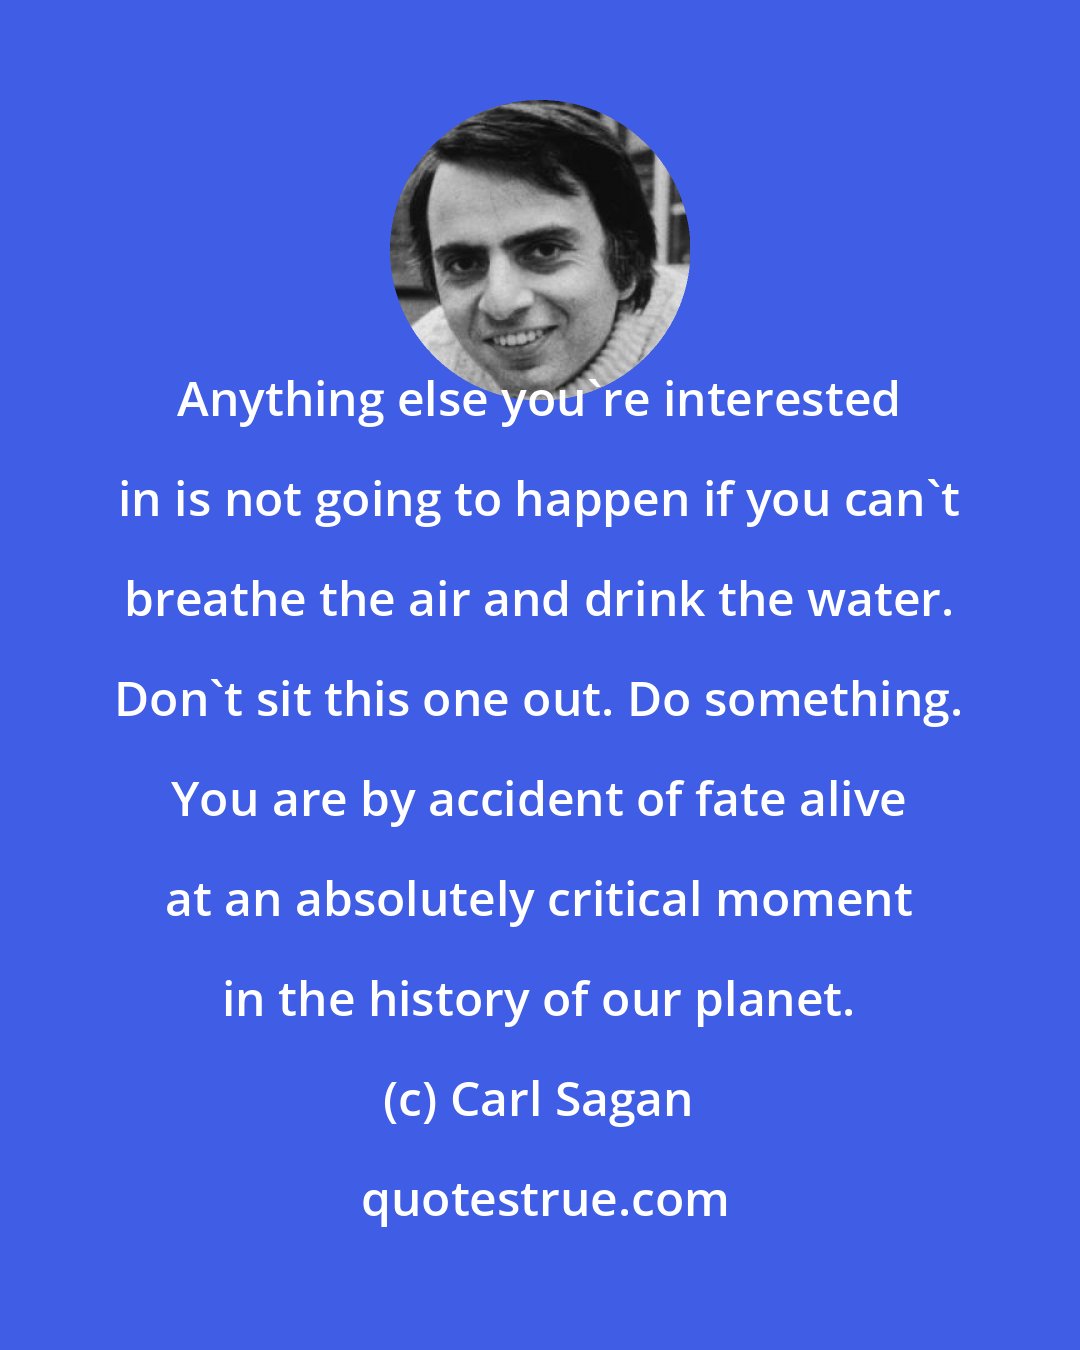 Carl Sagan: Anything else you're interested in is not going to happen if you can't breathe the air and drink the water. Don't sit this one out. Do something. You are by accident of fate alive at an absolutely critical moment in the history of our planet.